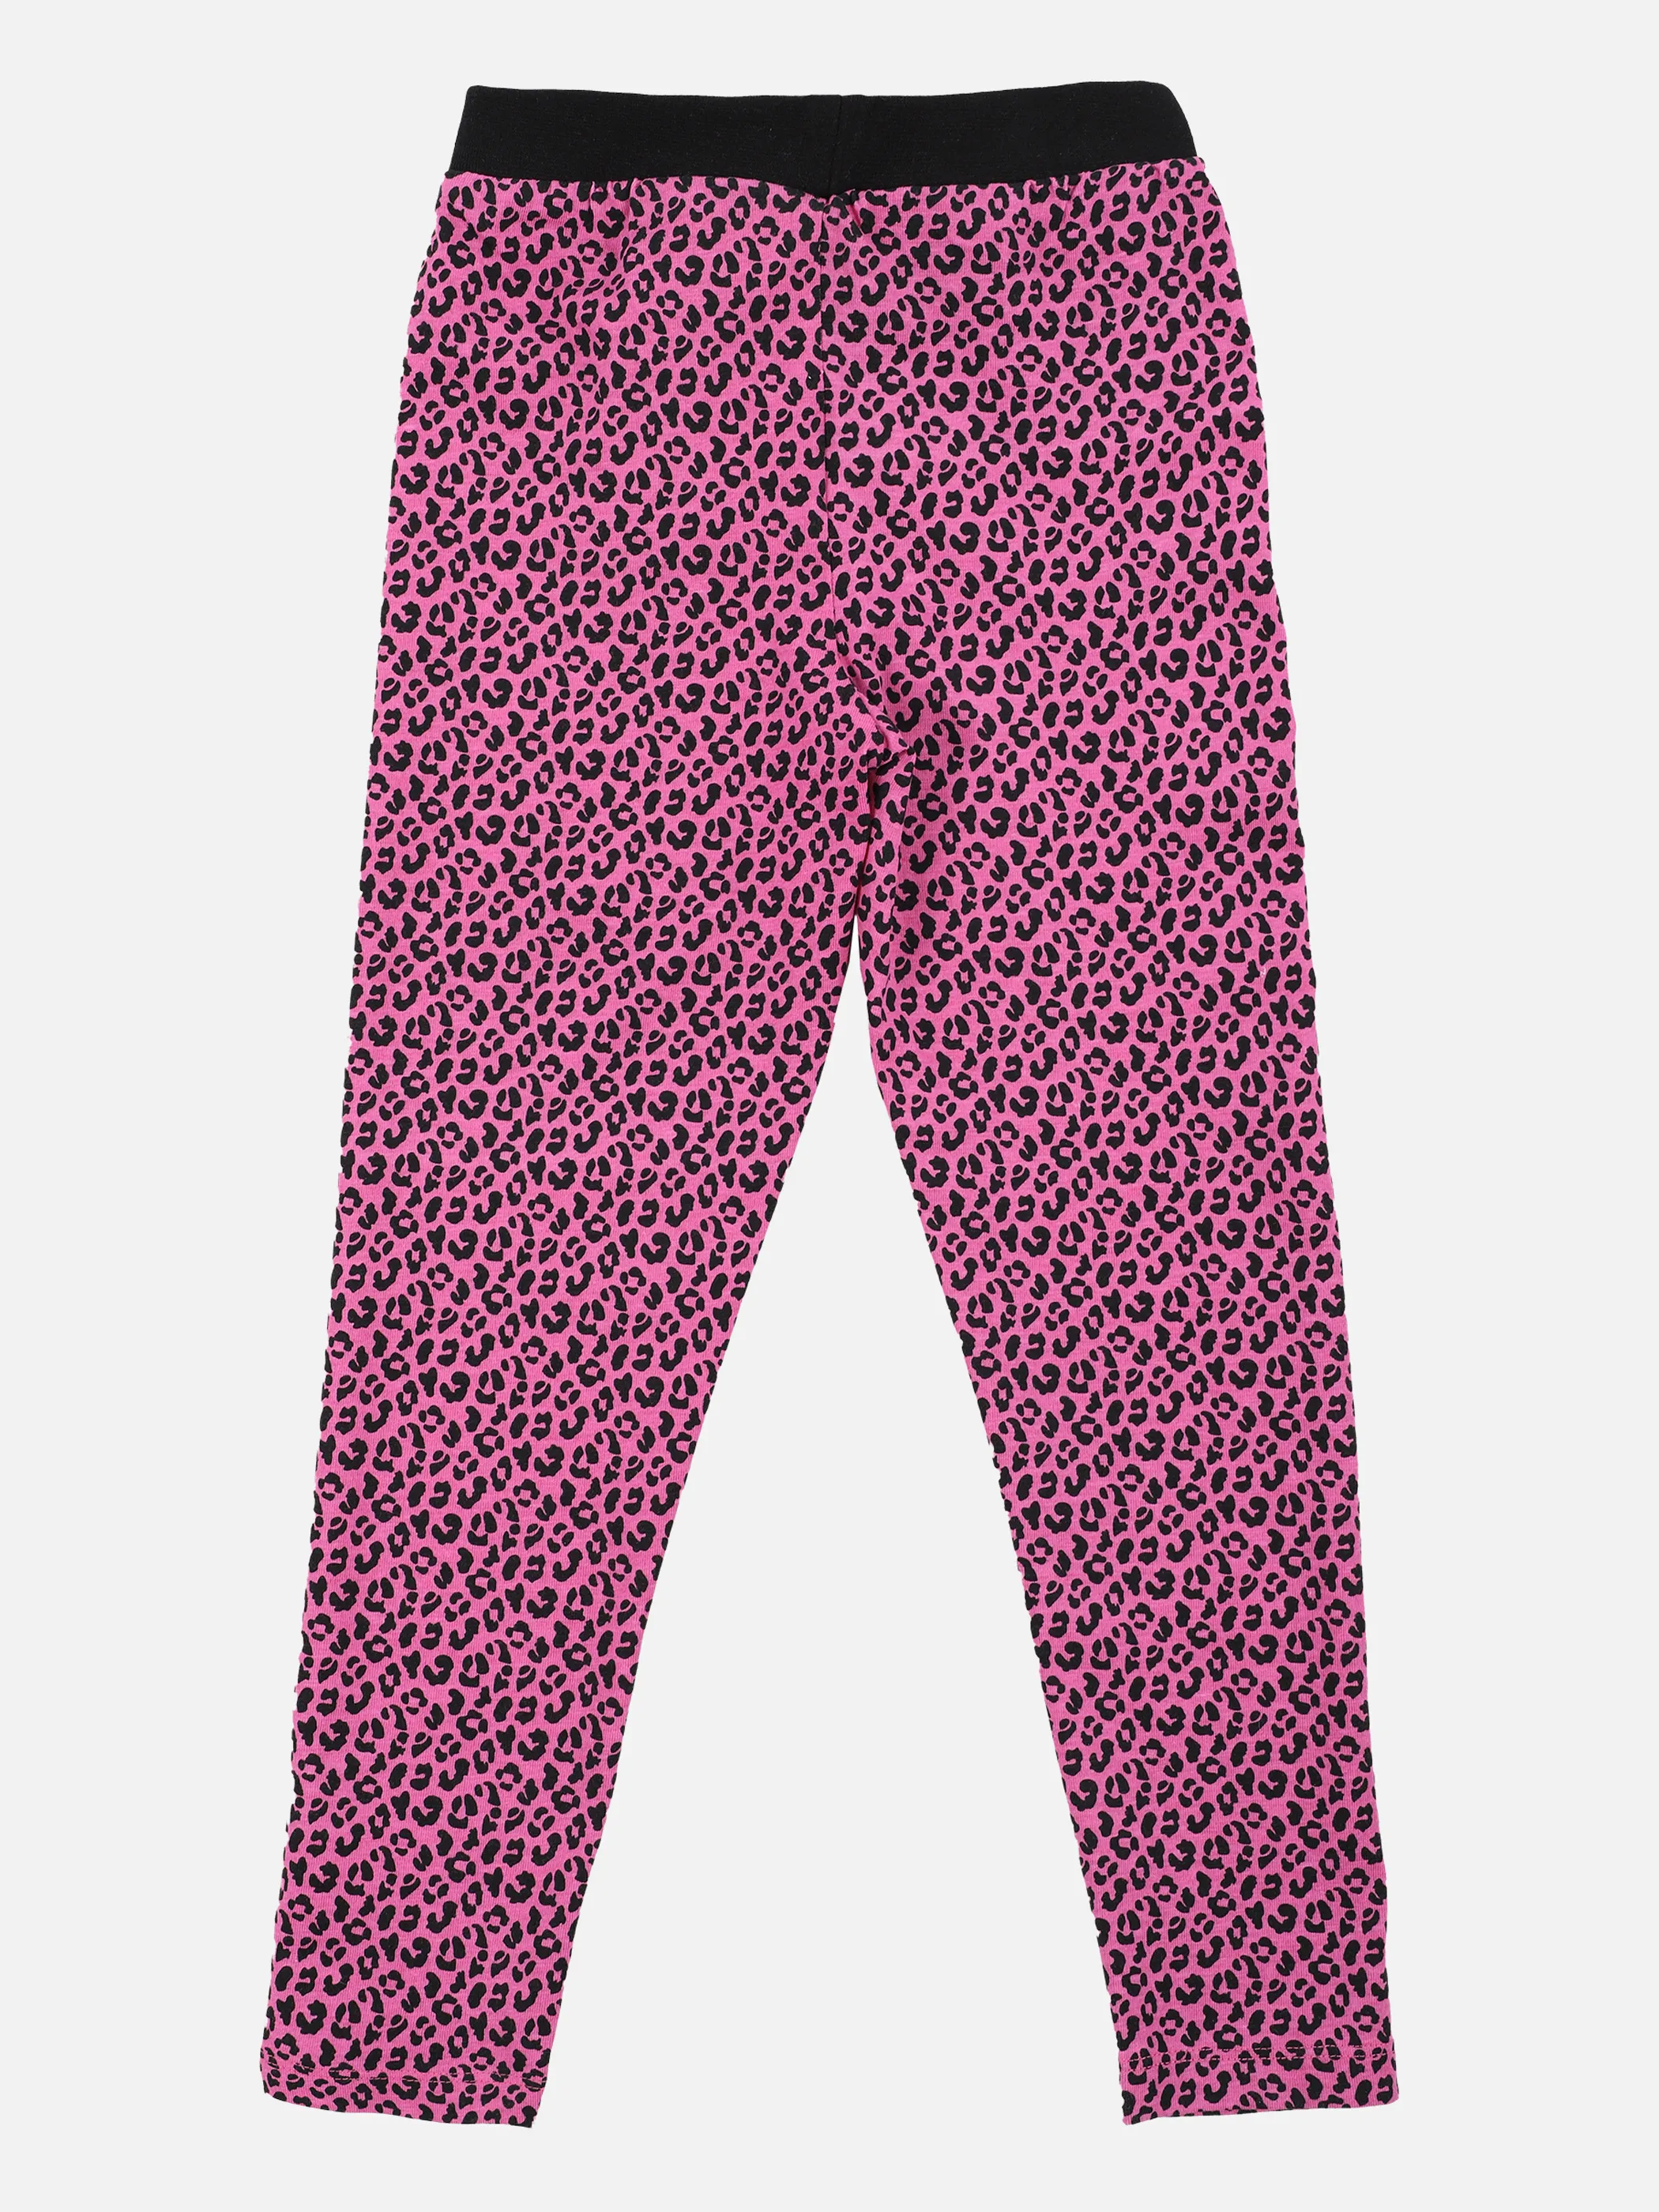 Stop + Go MG-Tight Pink 873754 PINK/AOP 2